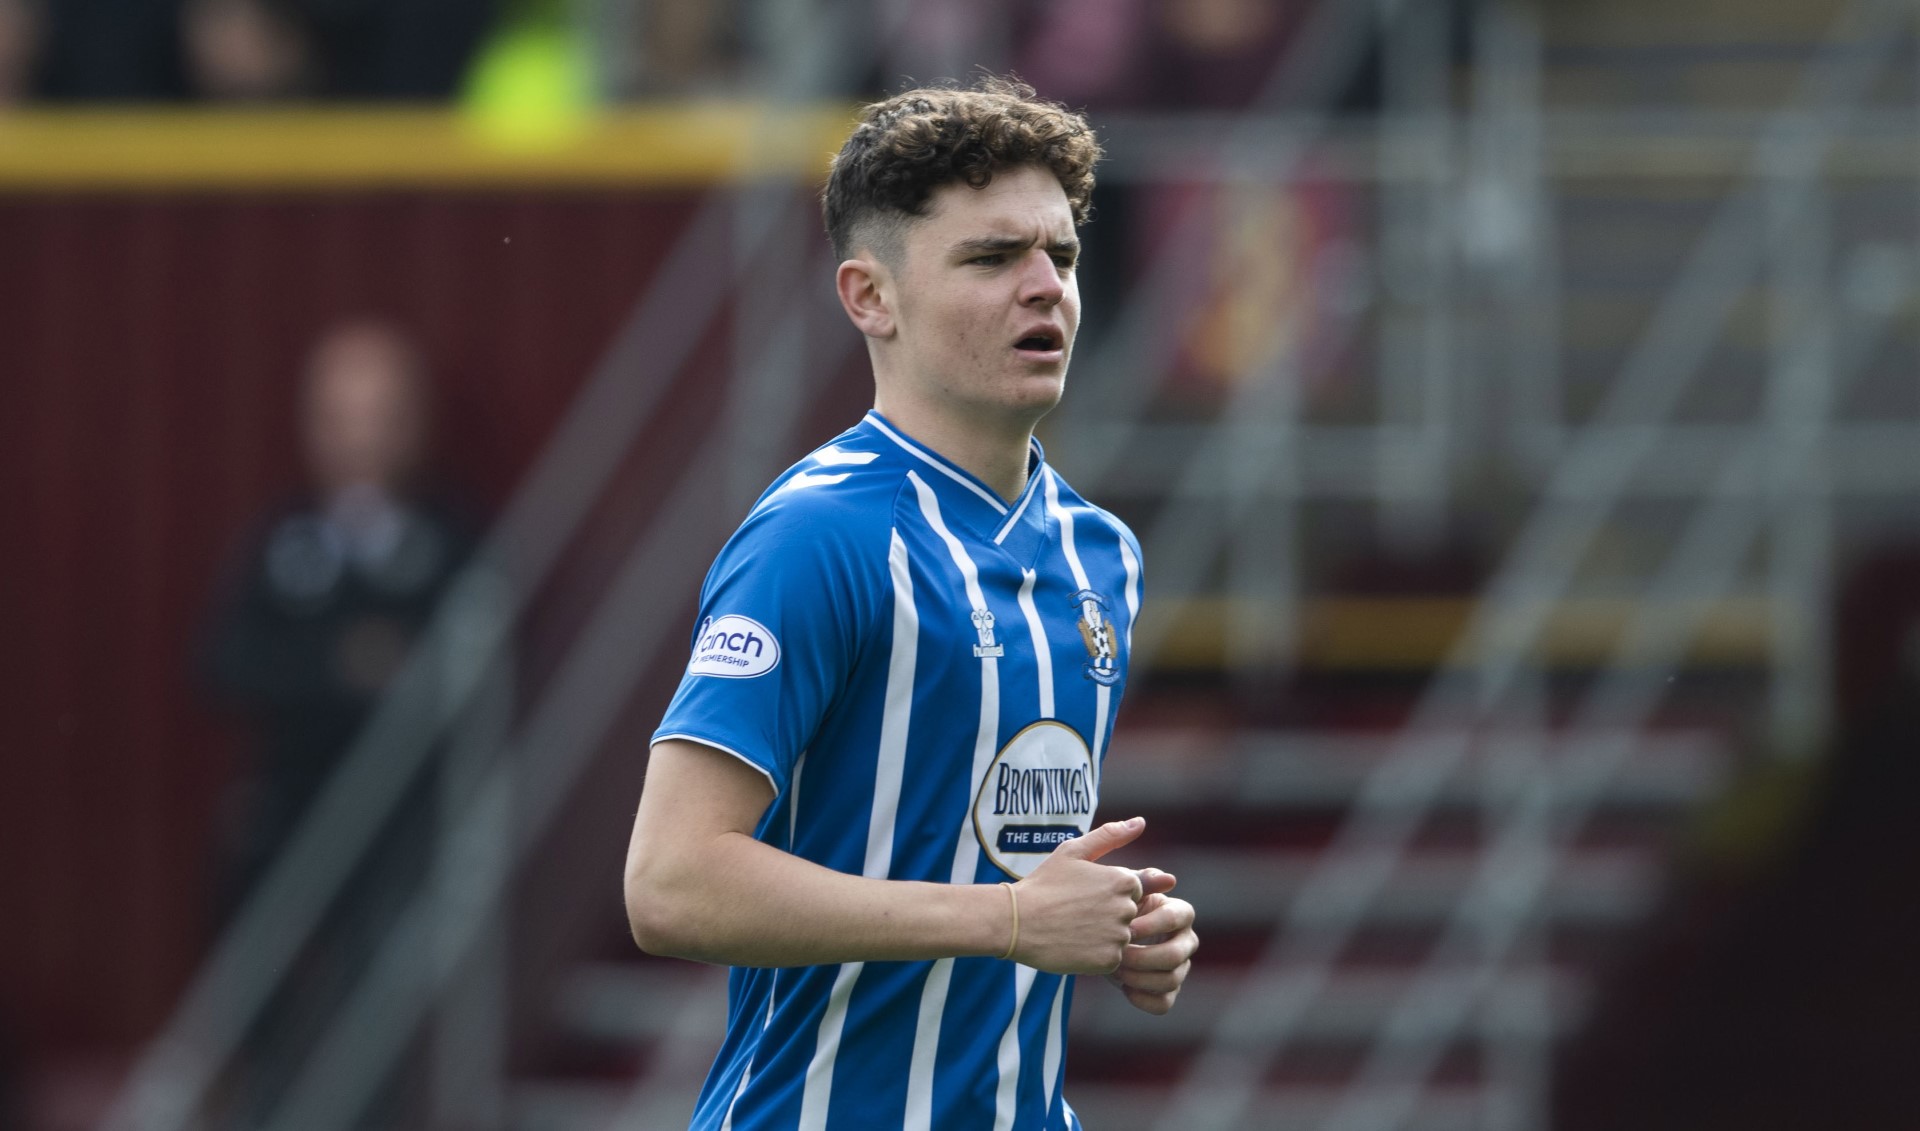 Bobby Wales joins Alloa Athletic on loan from Kilmarnock